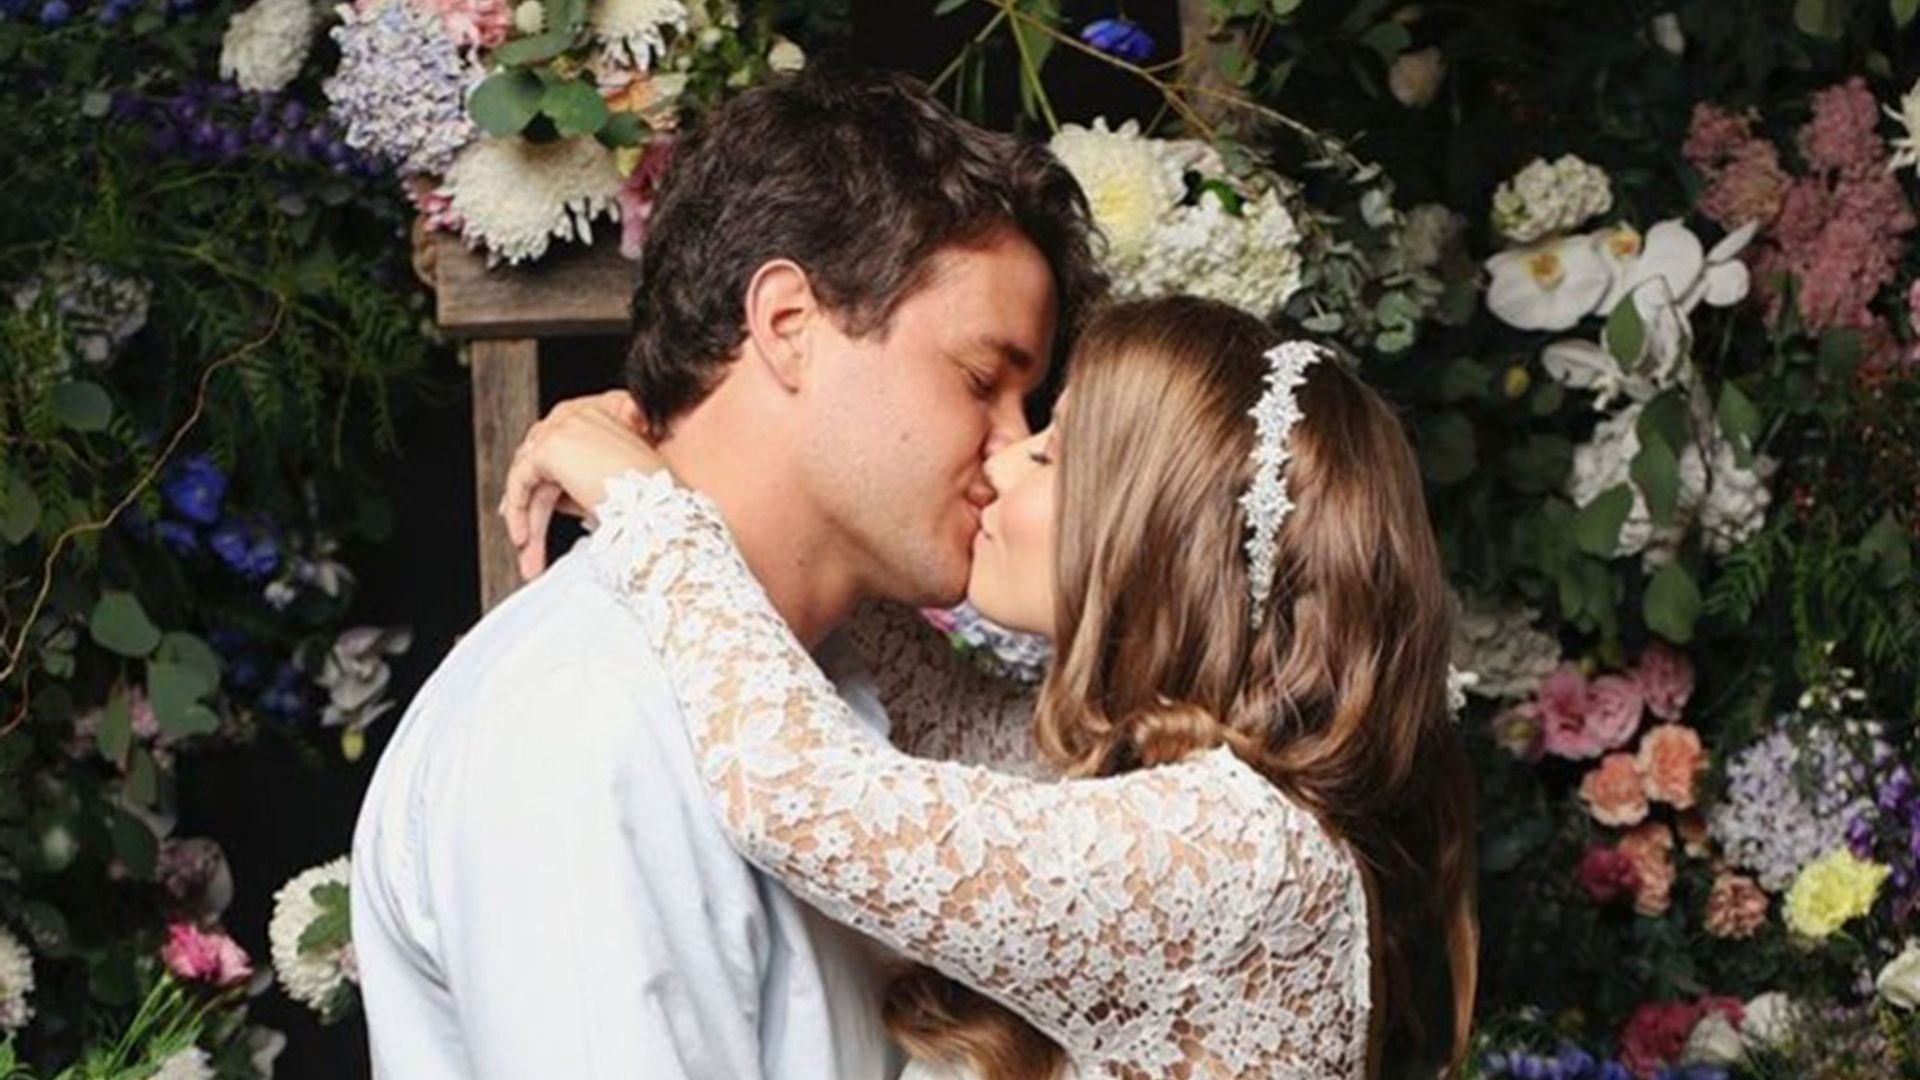 Bindi Irwin shares the special meaning behind her wedding cake